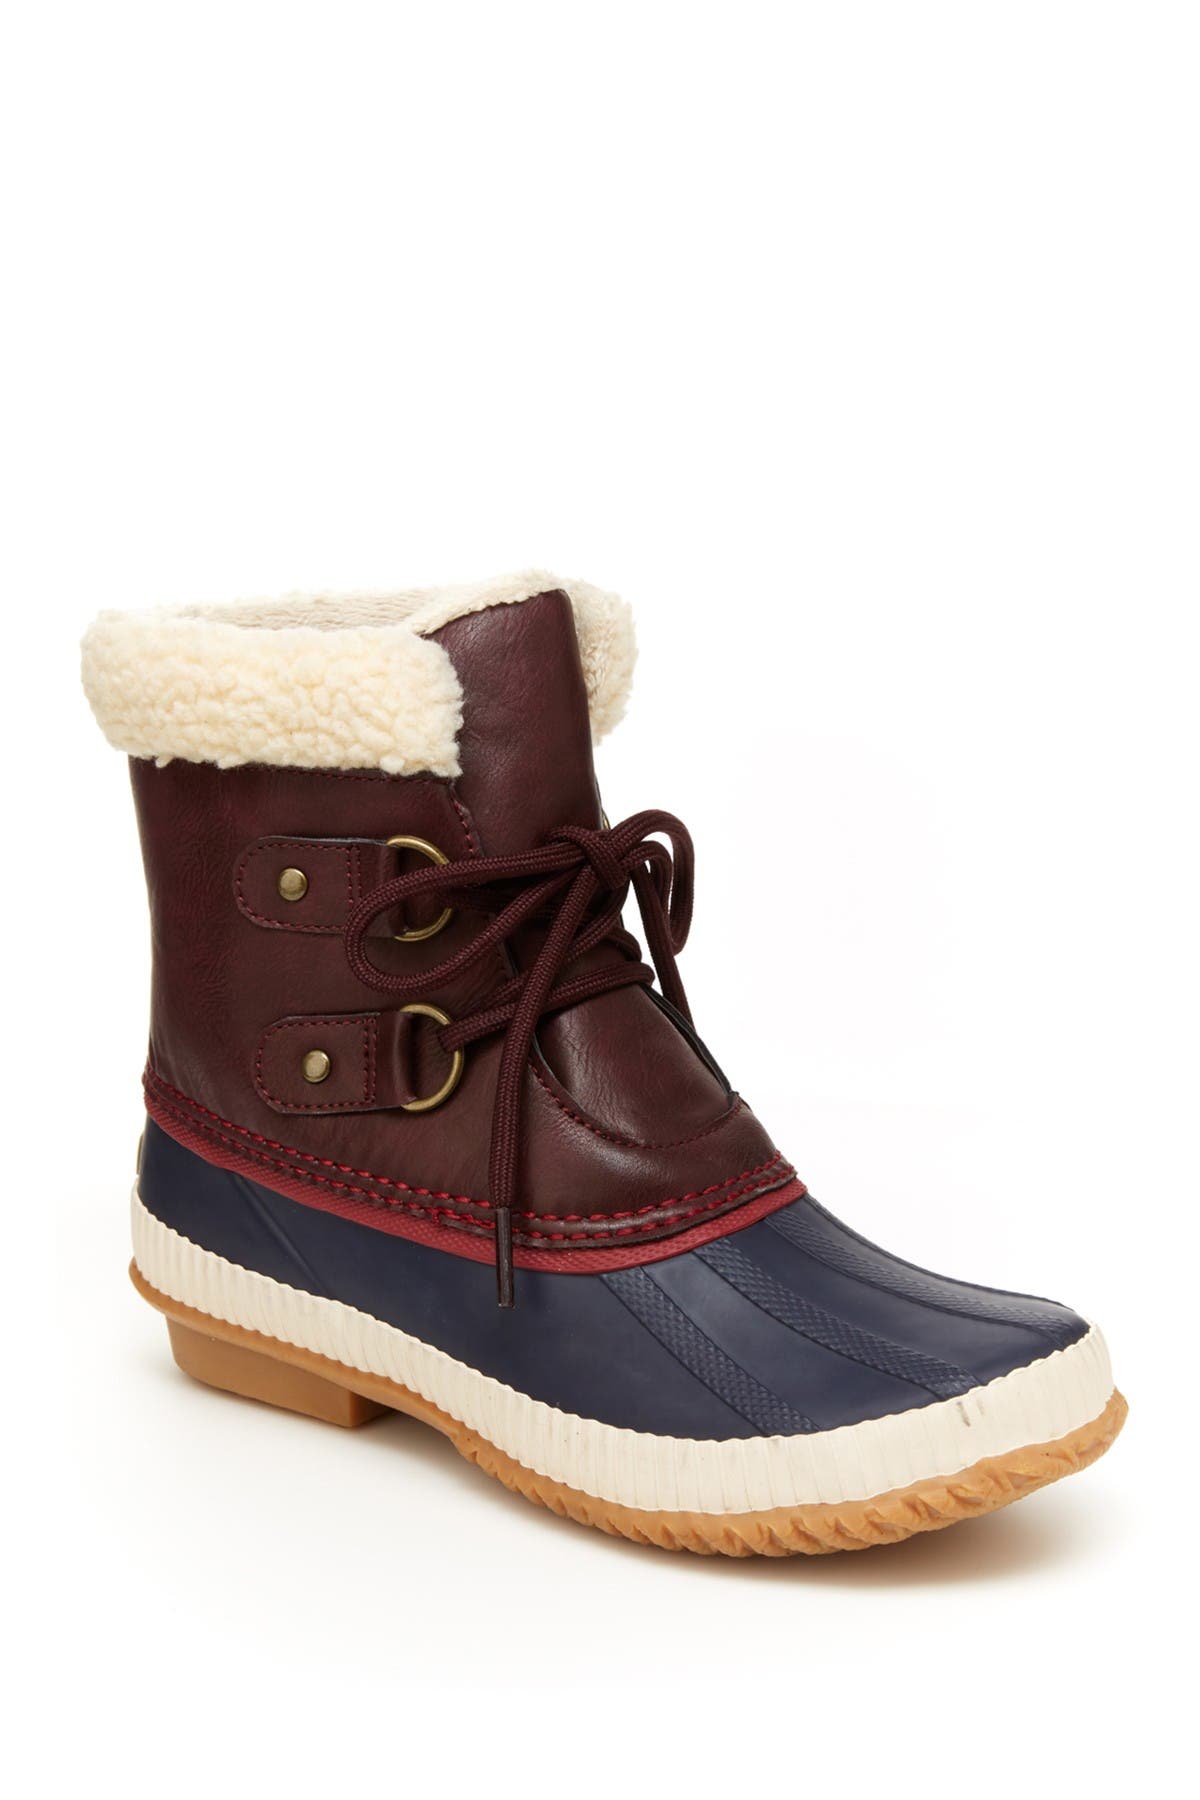 shearling lined boots waterproof